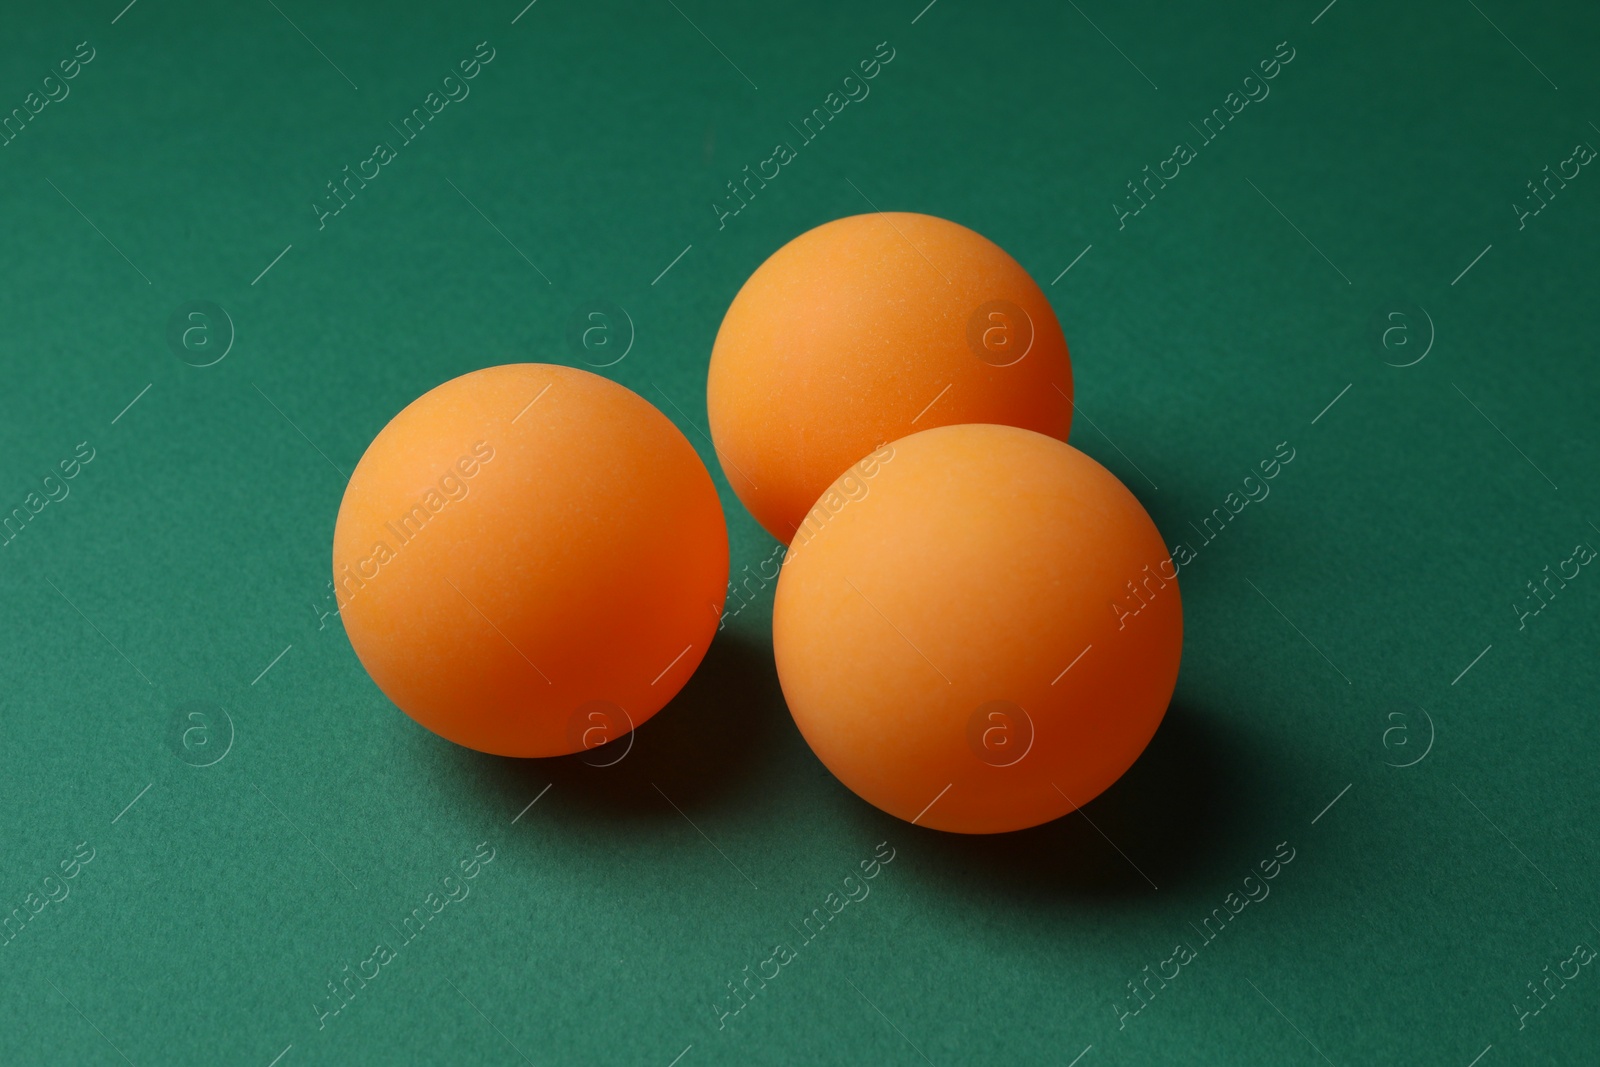 Photo of Three ping pong balls on green background